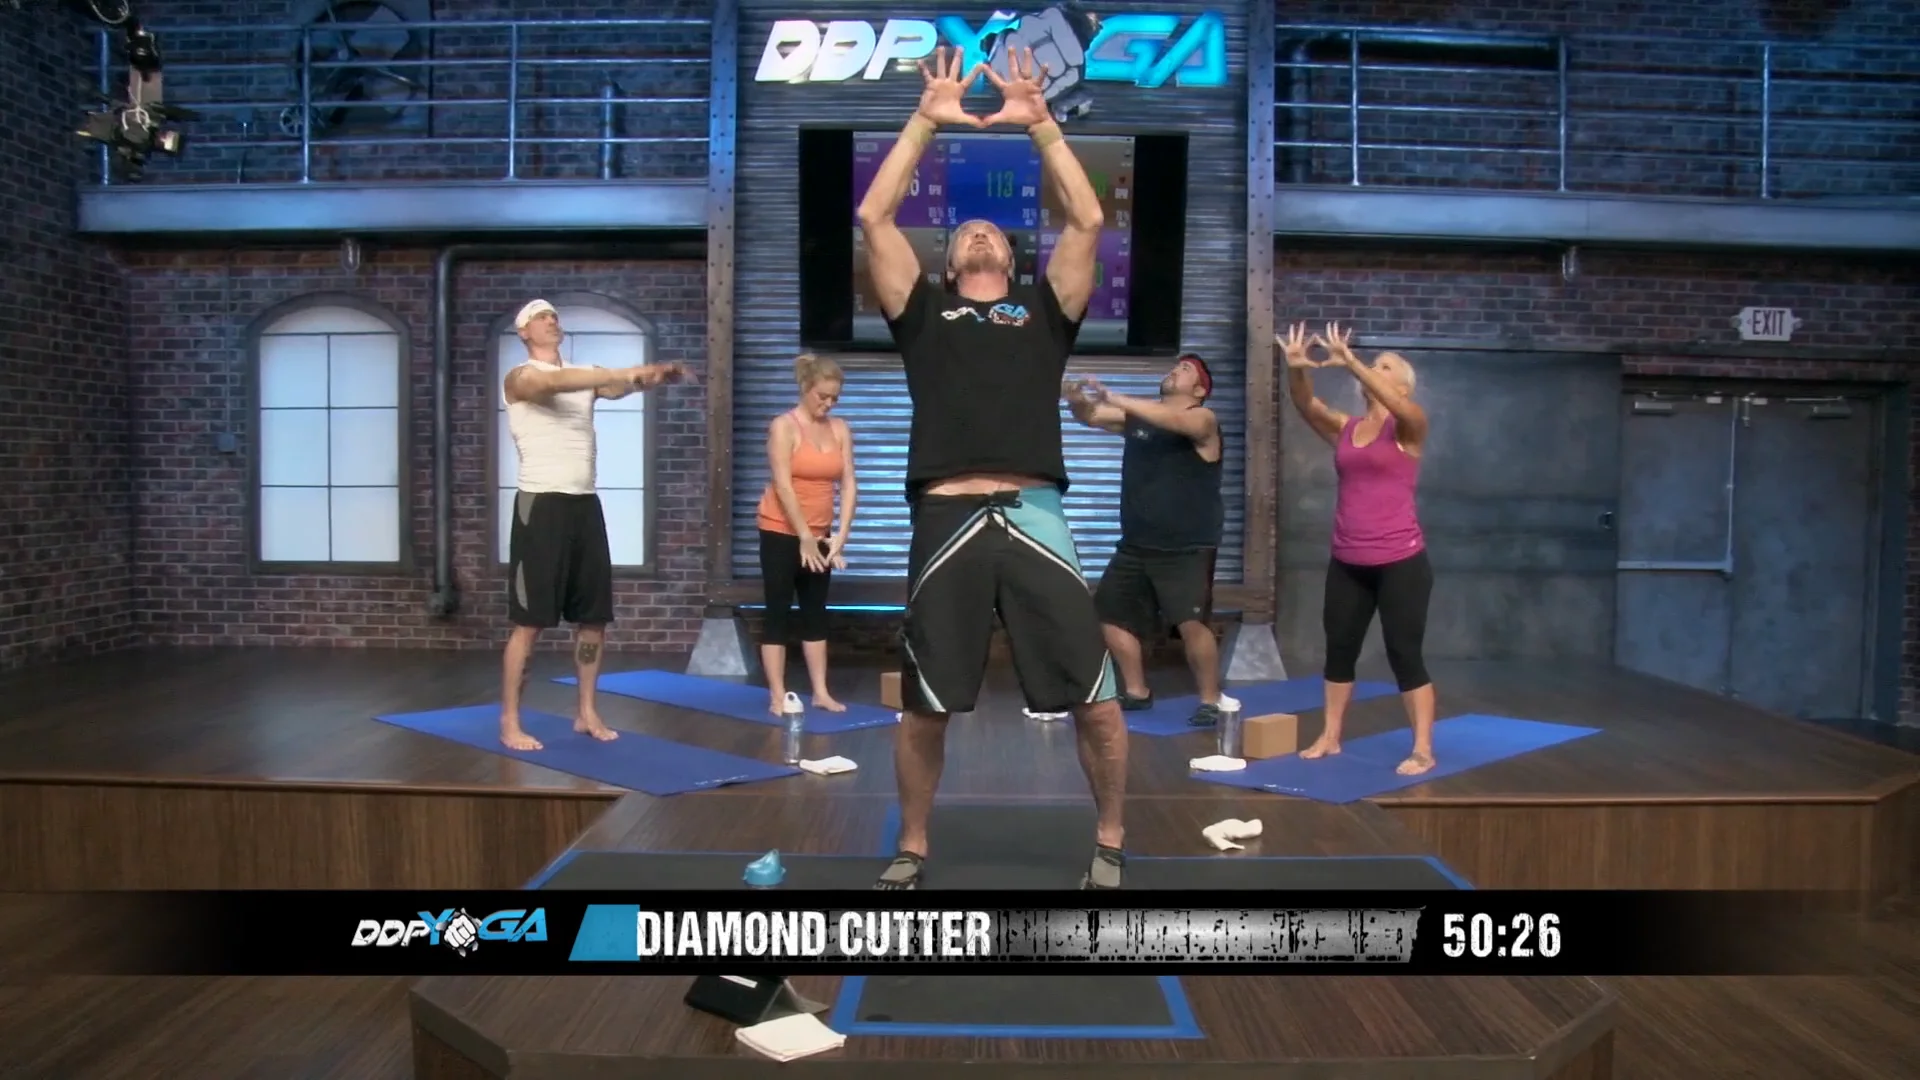 DDP YOGA (@ddpyoga) • Instagram photos and videos